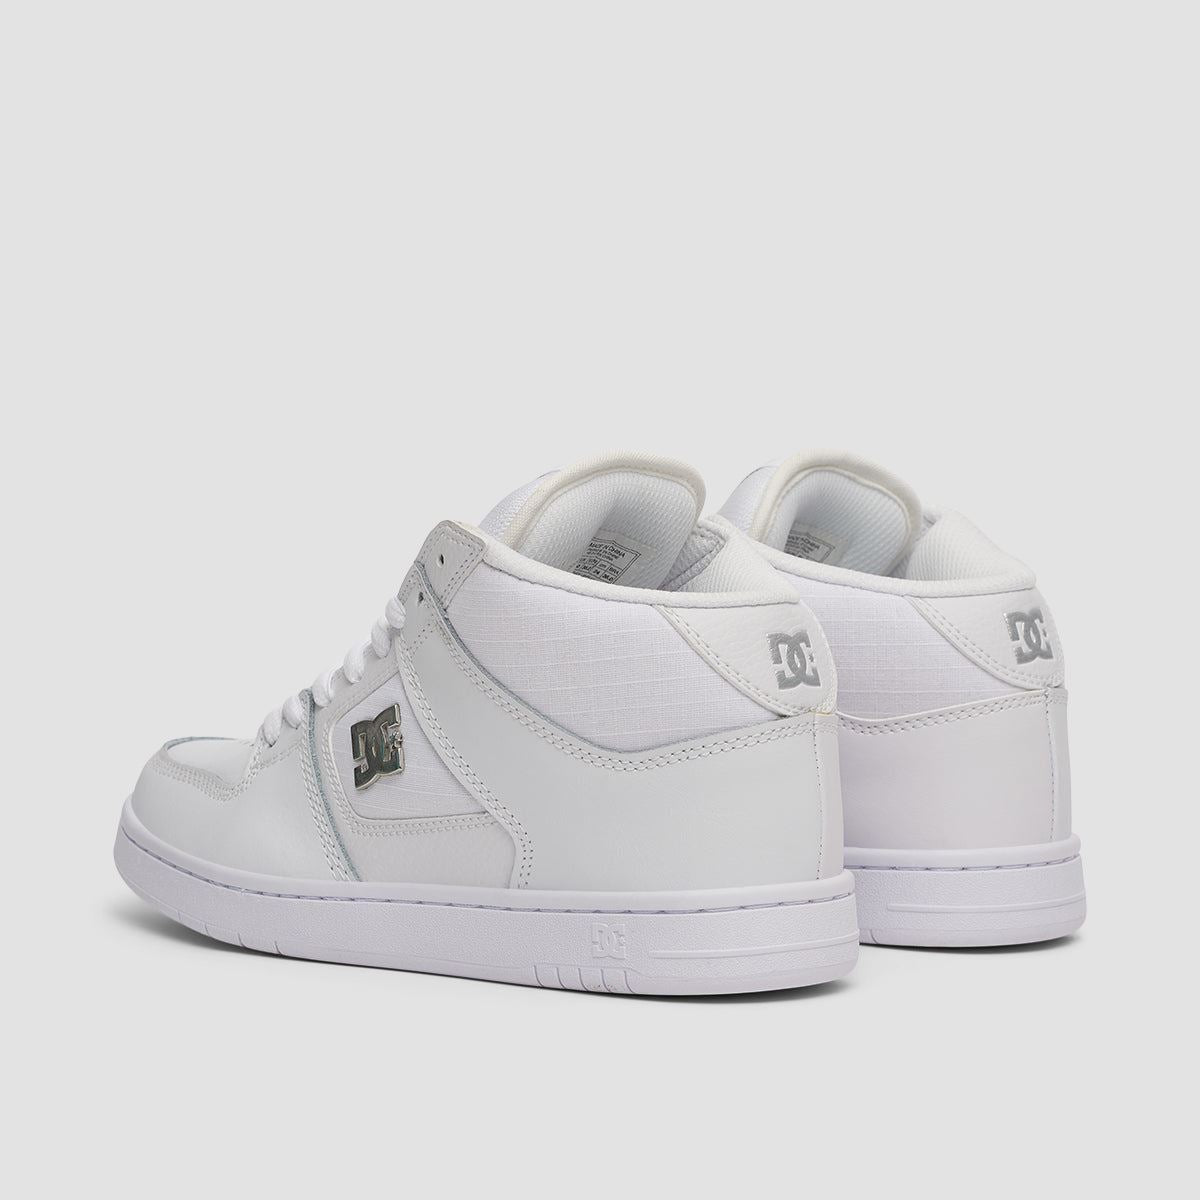 DC Manteca 4 Mid Shoes - White/Silver - Womens